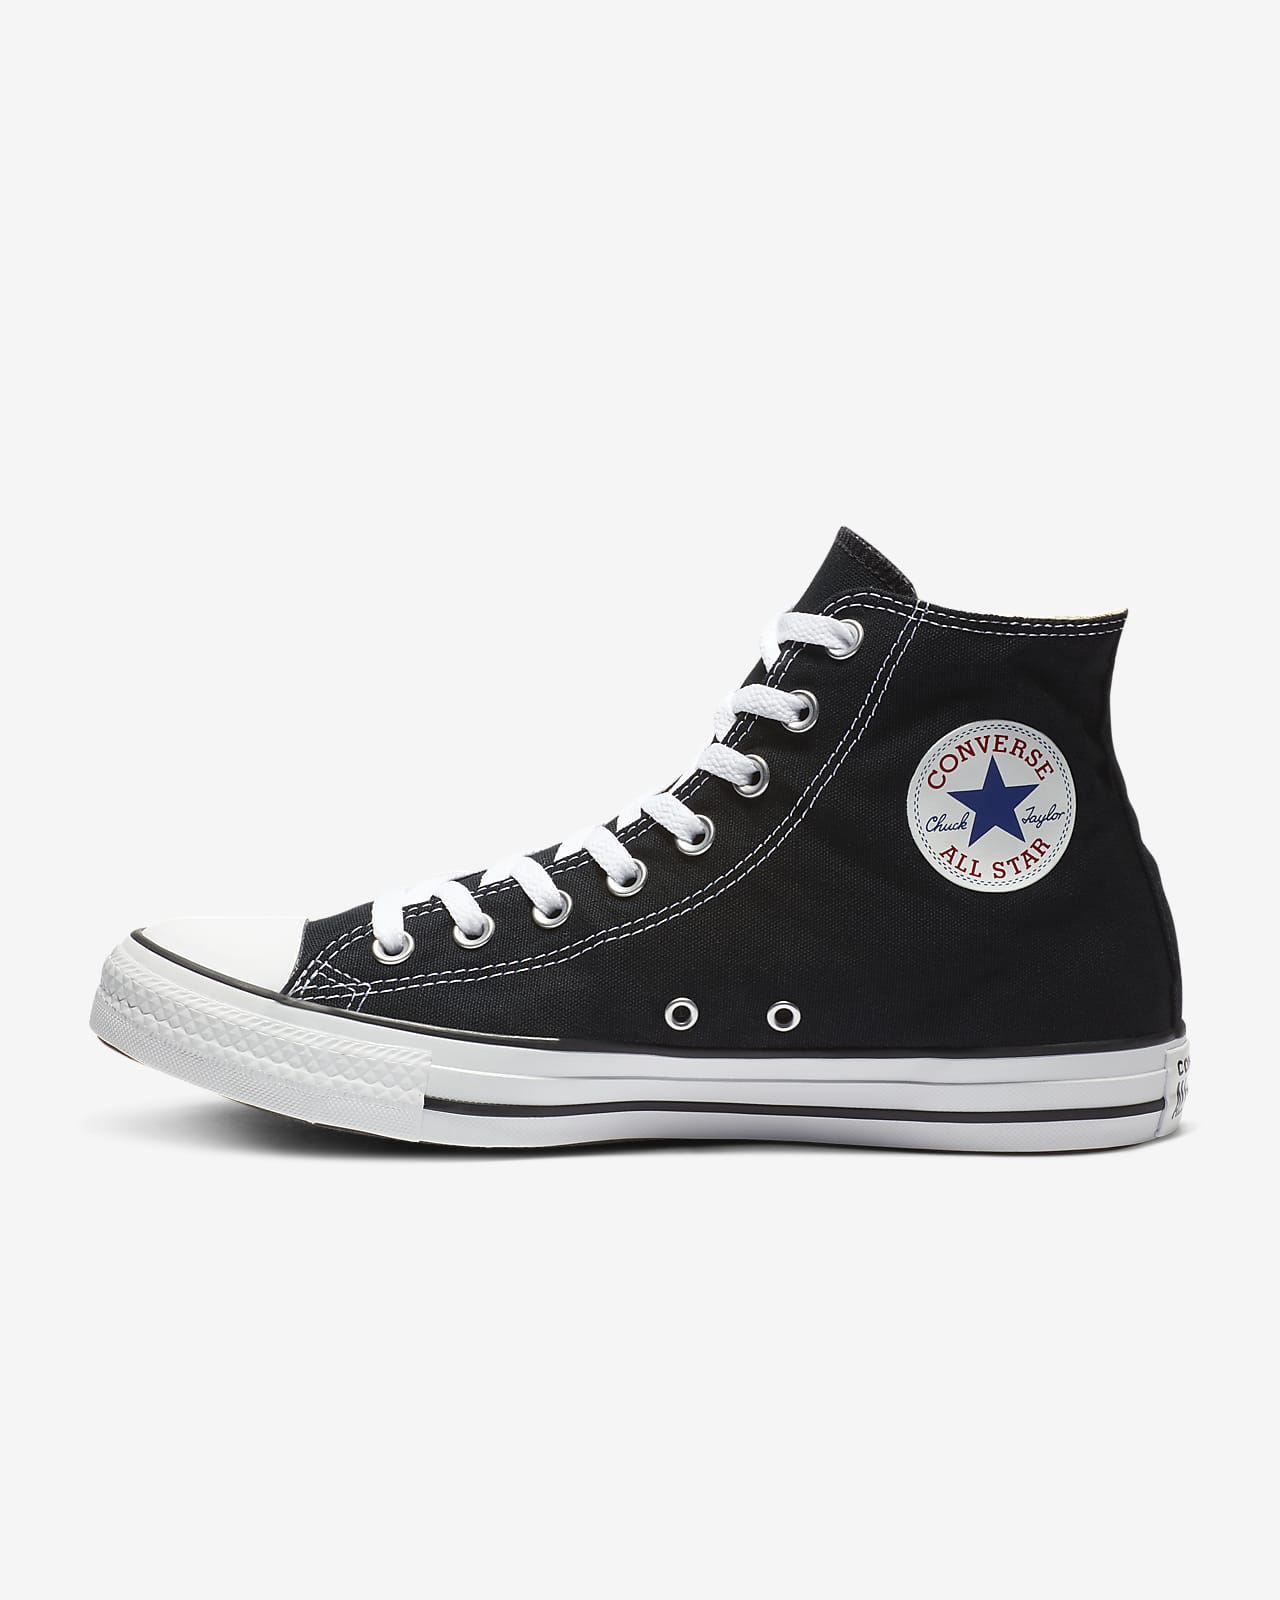 draft Electropositive Immunity Converse Chuck Taylor All Star High Top Shoes. Nike.com